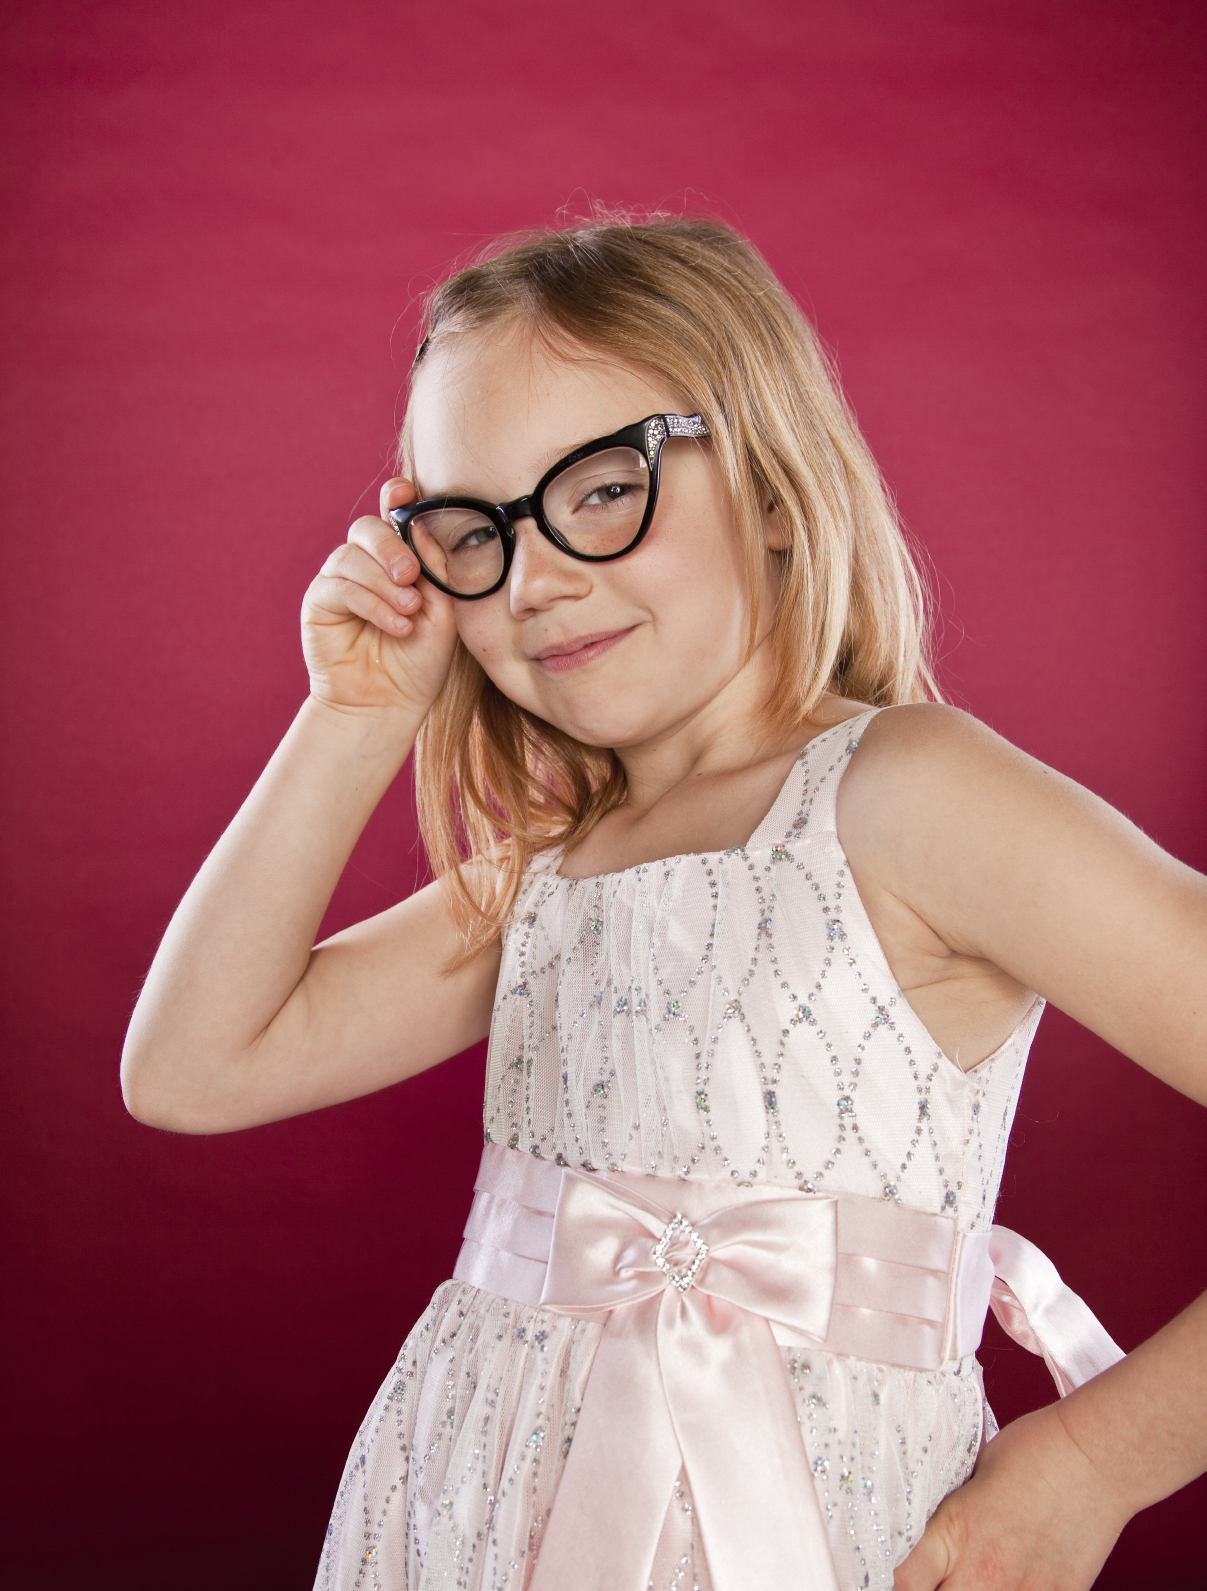 little girl with glasses looking sly